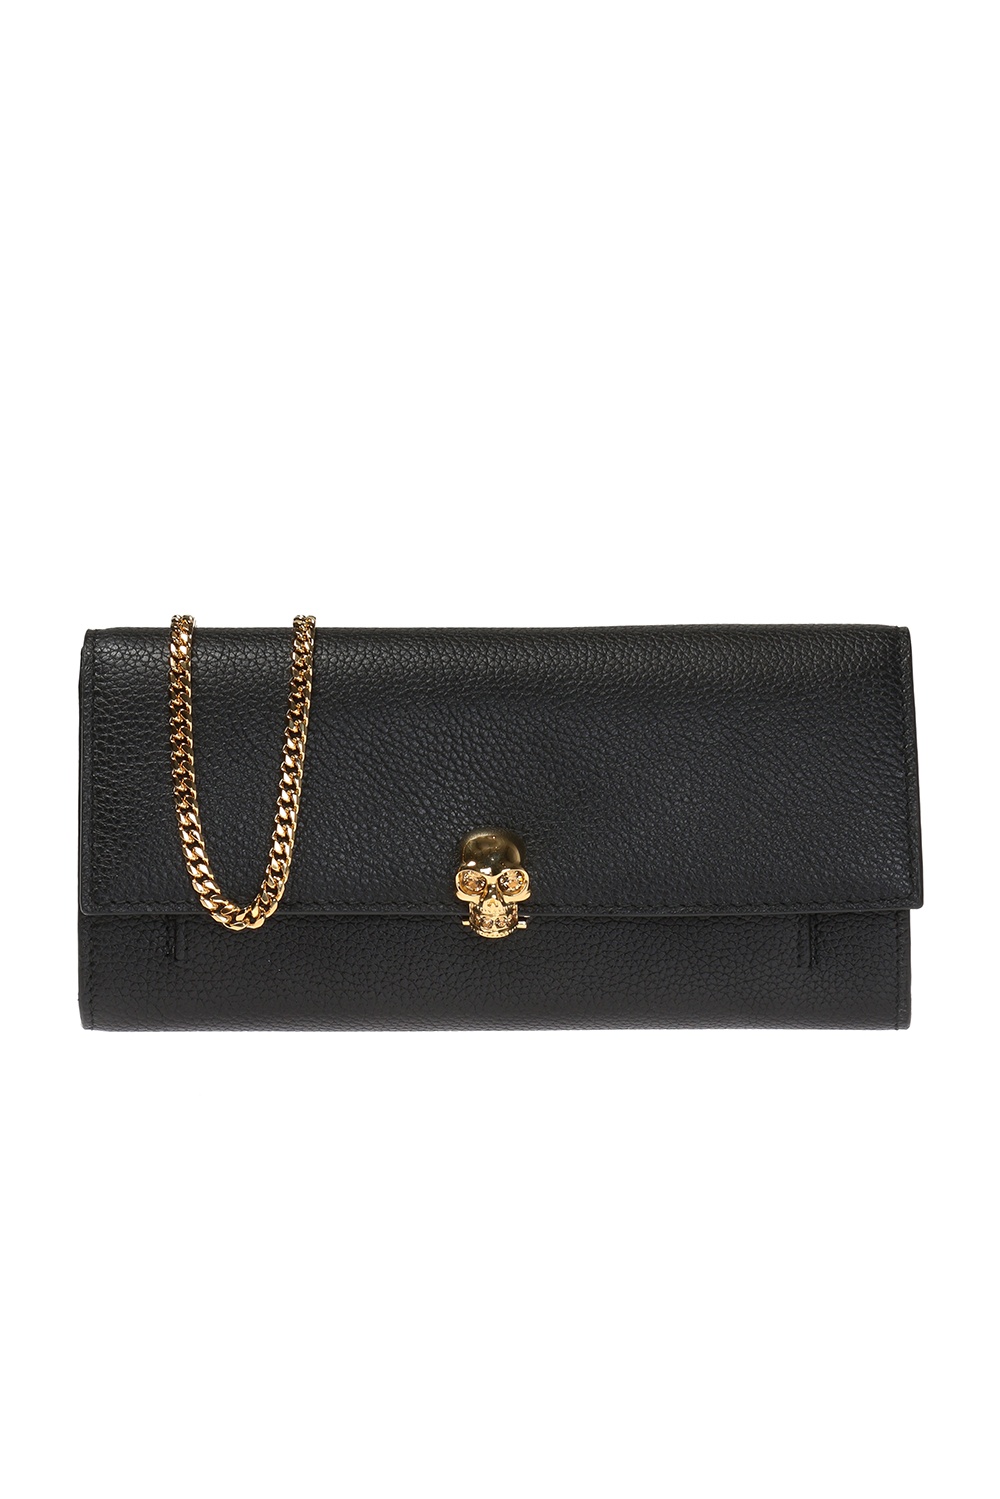 Wallet with a chain and a skull motif Alexander McQueen - Vitkac 